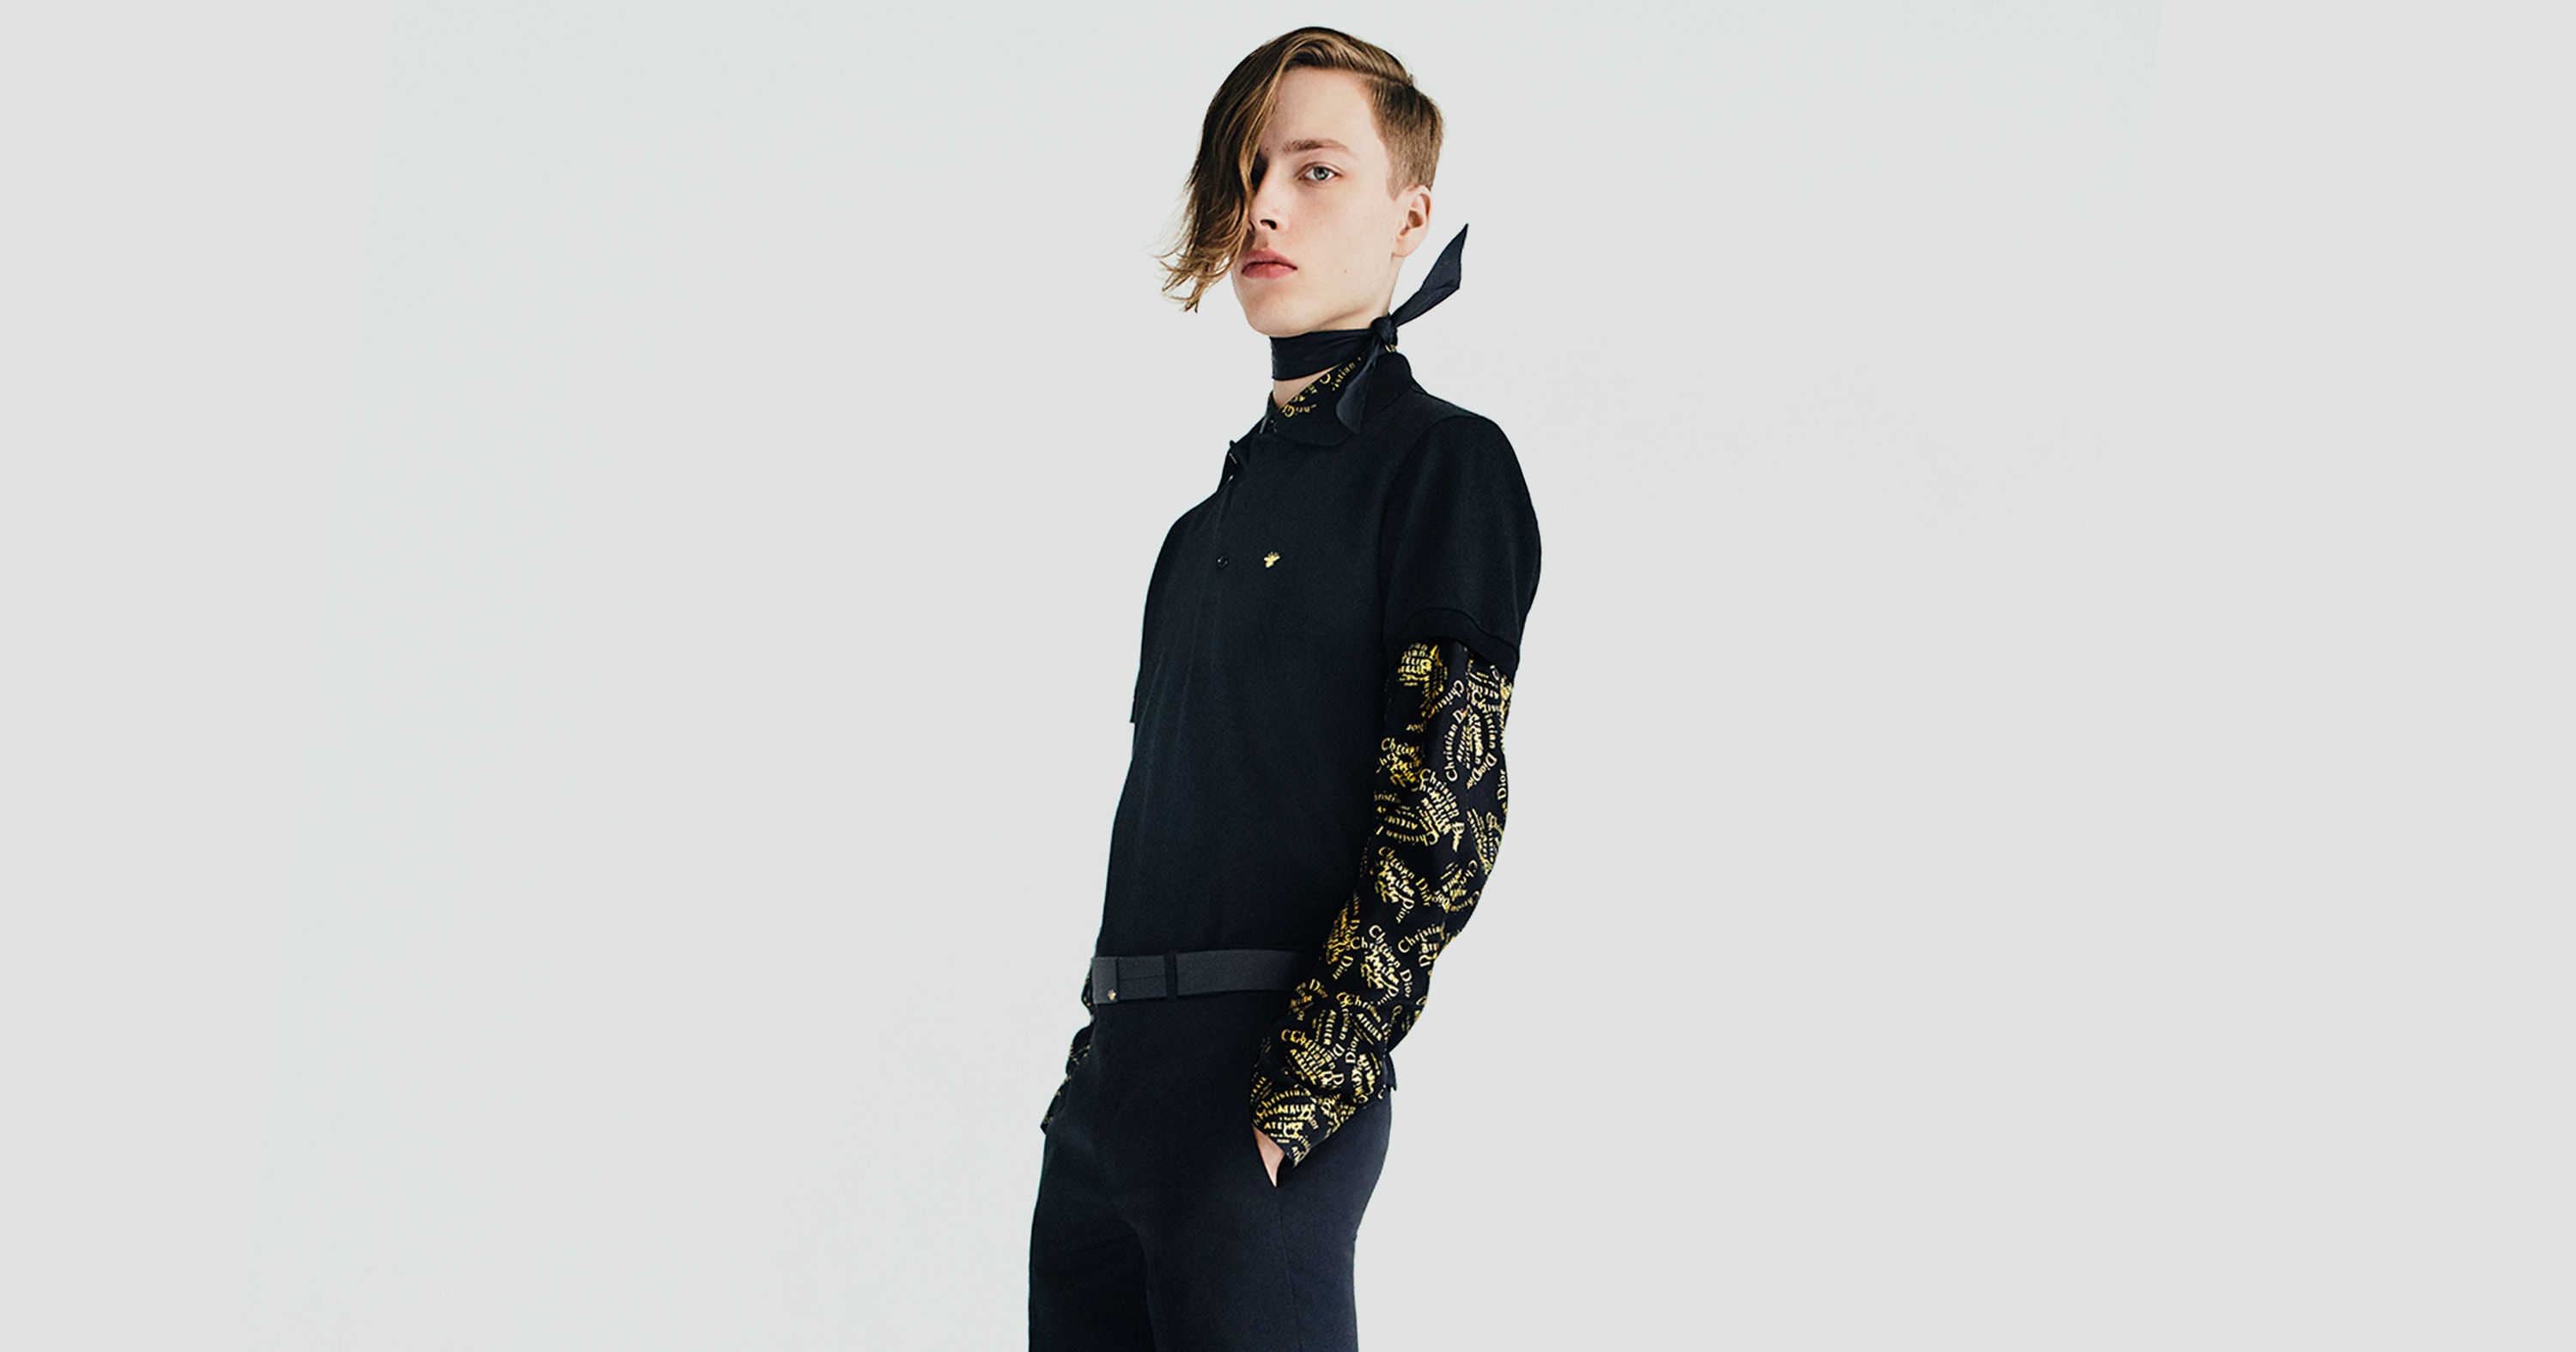 18-karat gold threads? The new Dior Homme capsule boldly says why not